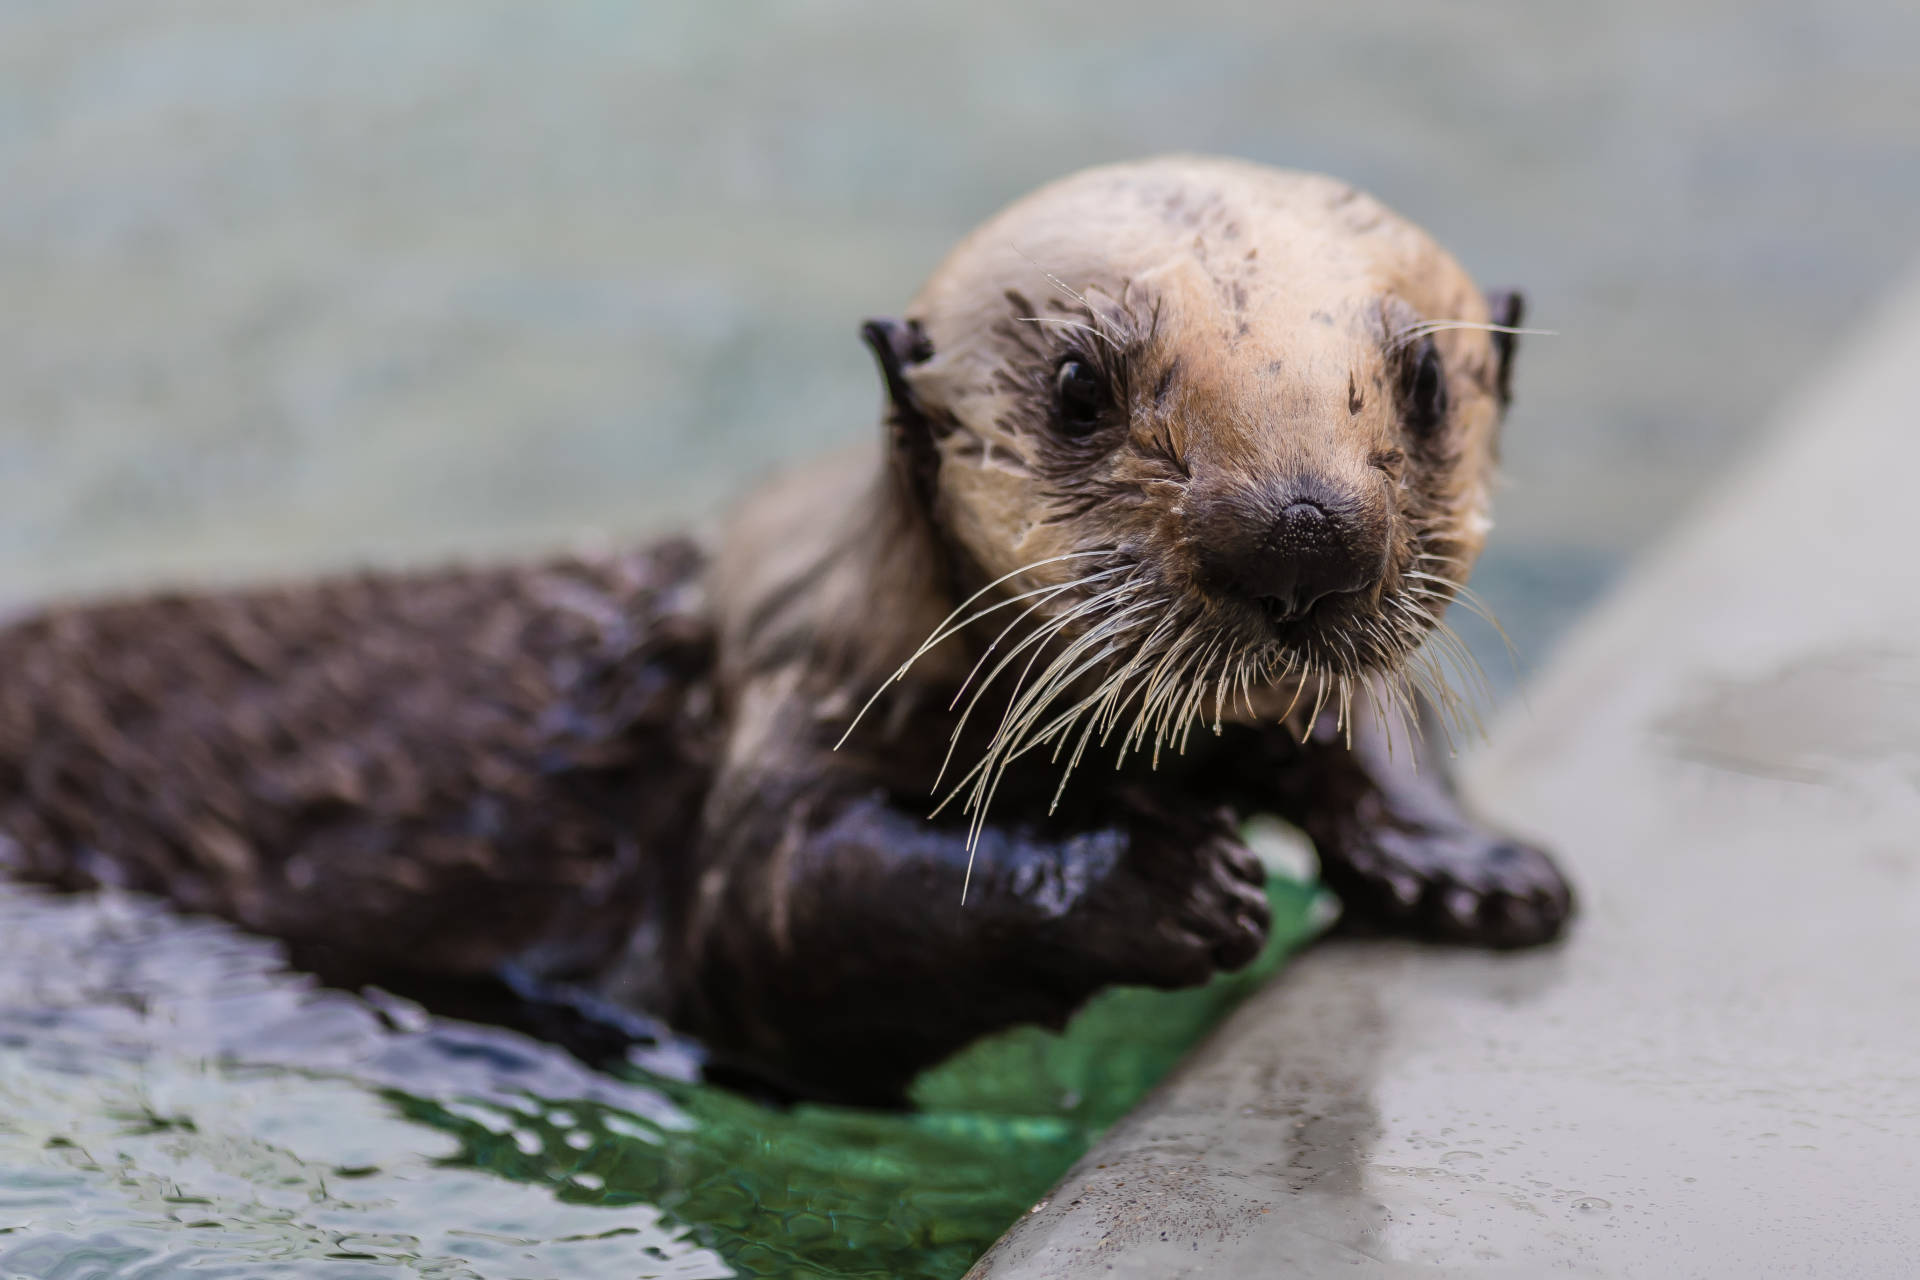 Langly,  a  female  southern  sea  otter  pup,  steps  out  of  her  pool  while  in  rehabilitation  at  The  Marine  Mammal  Center.    Bill  Hunnewell  ©The  Marine  Mammal  Center_USFWS  permit  MA101713-1